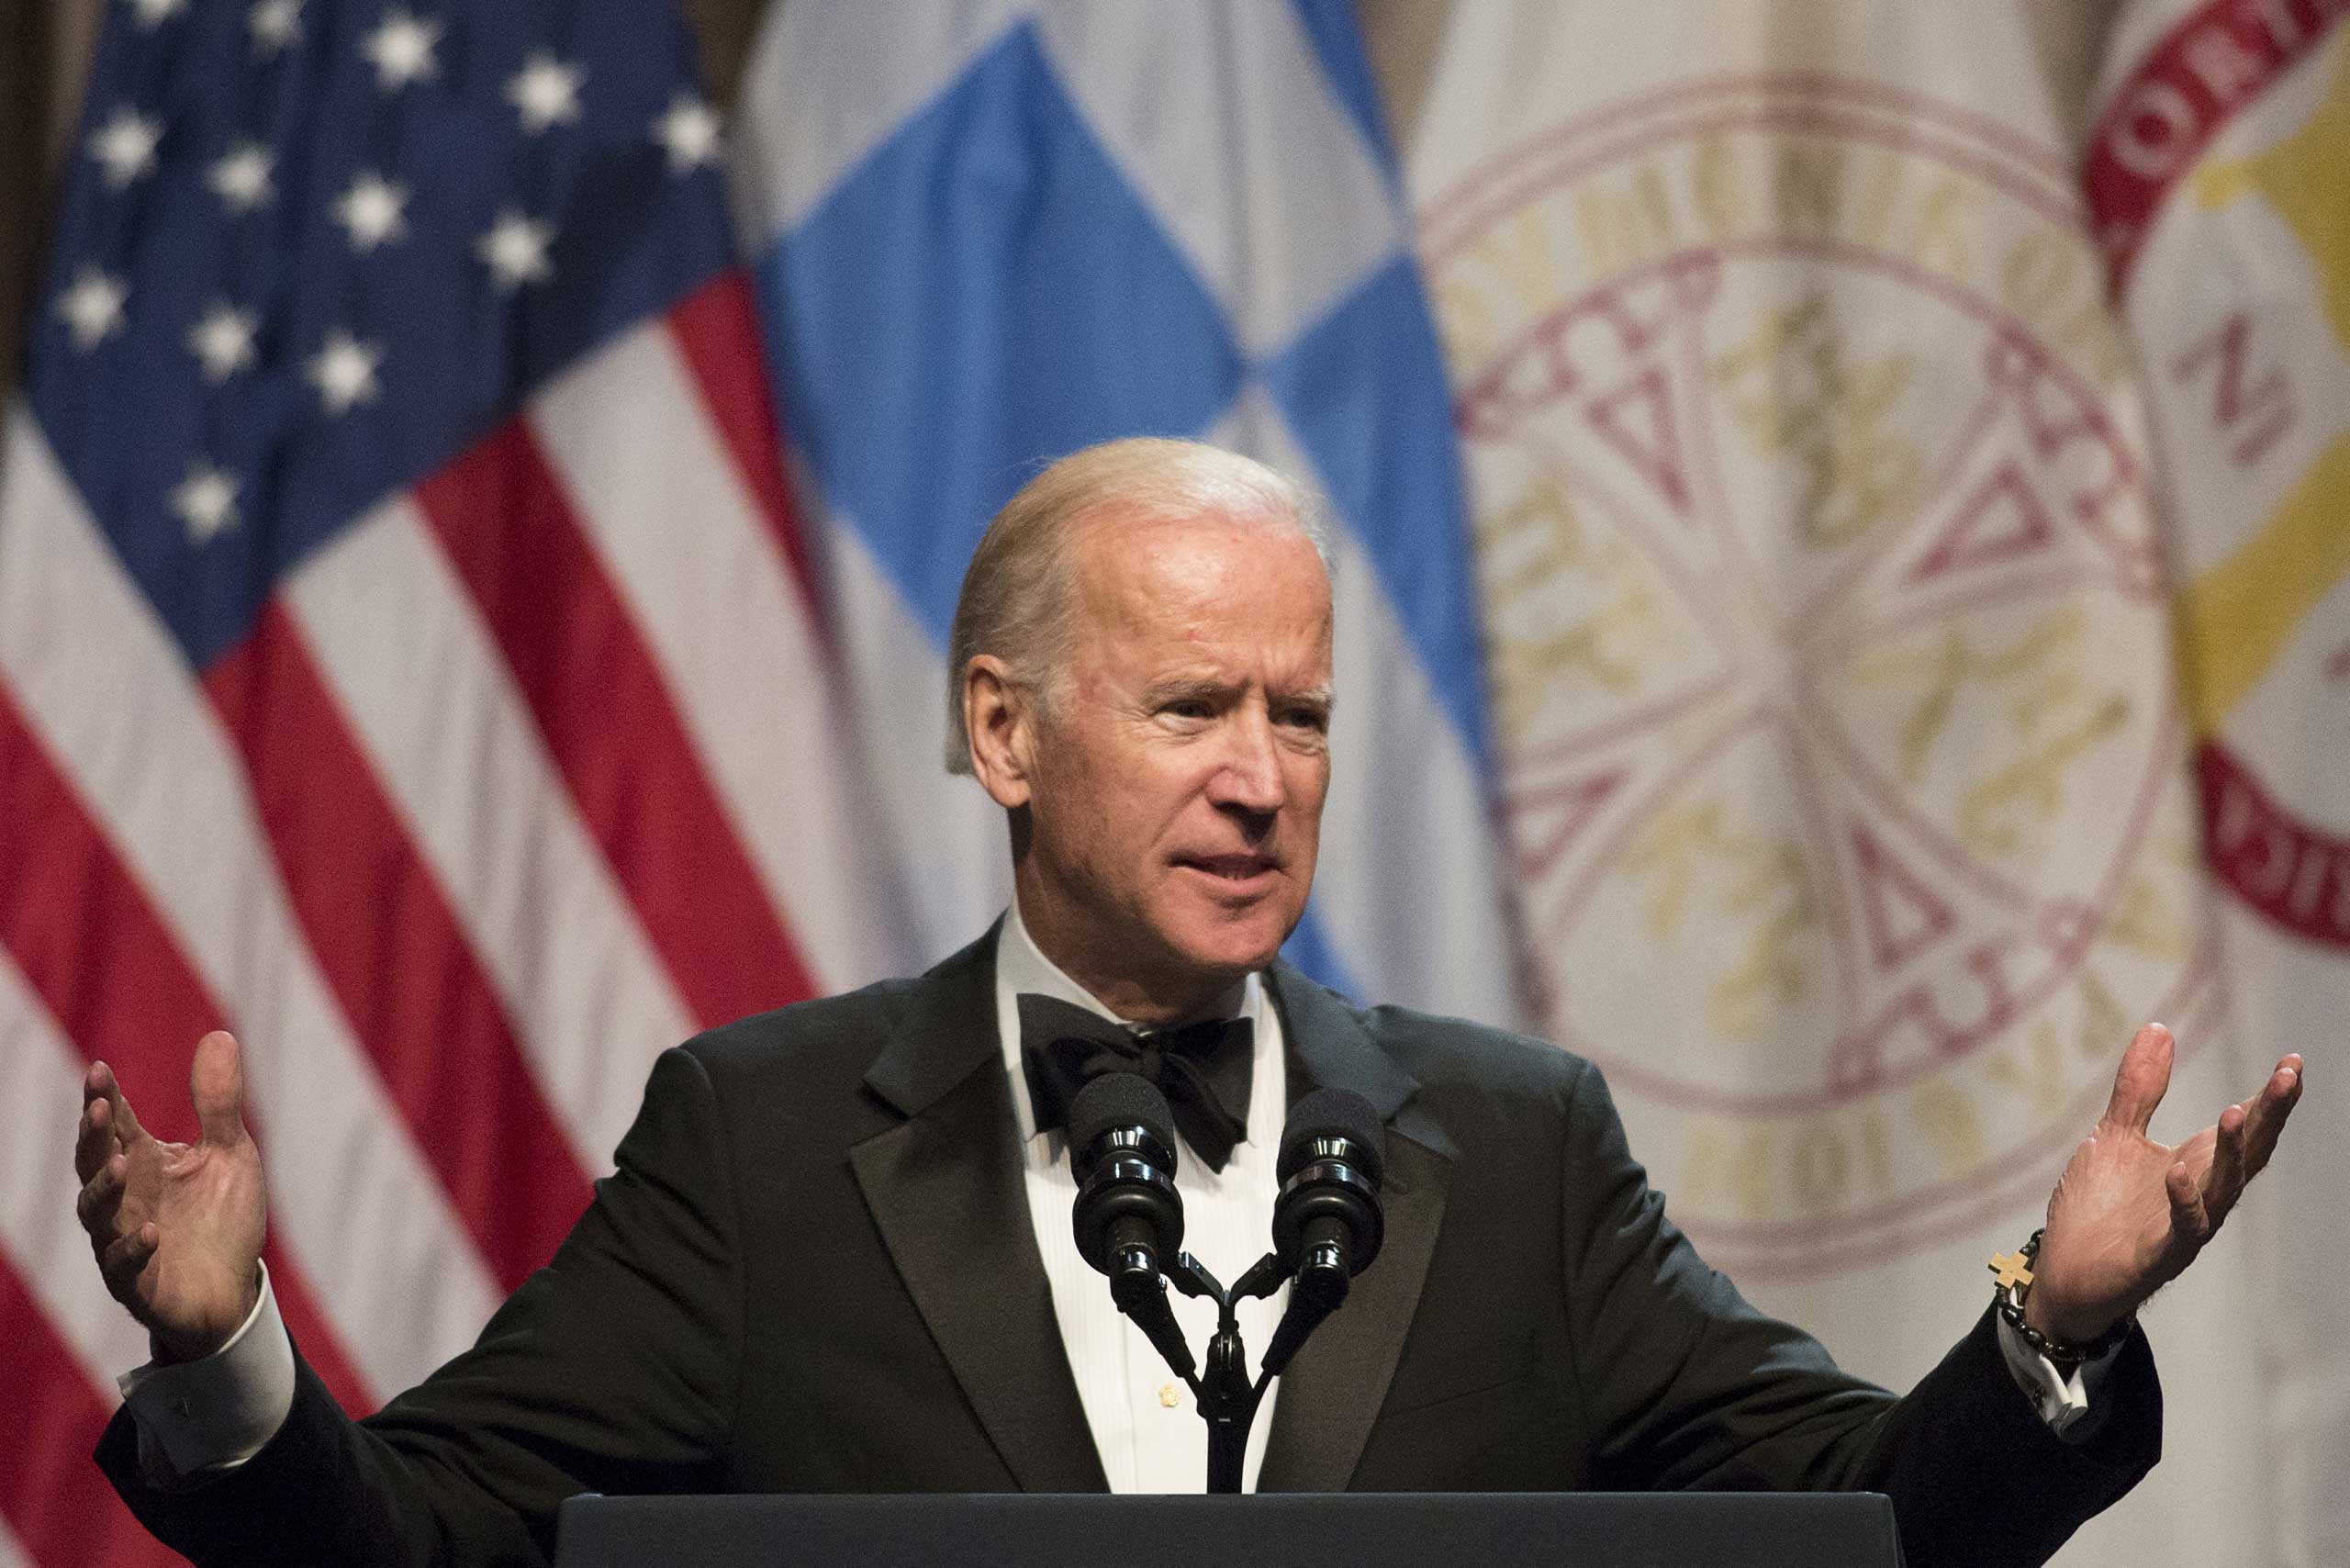 U.S. Vice President Joe Biden speaks after receiving the Athenagoras Human Rights Award from the Order of St. Andrew, Archons of the Ecumenical Patriarchate, in New York City on Oct. 17, 2015 (Darren Ornitz—Reters)